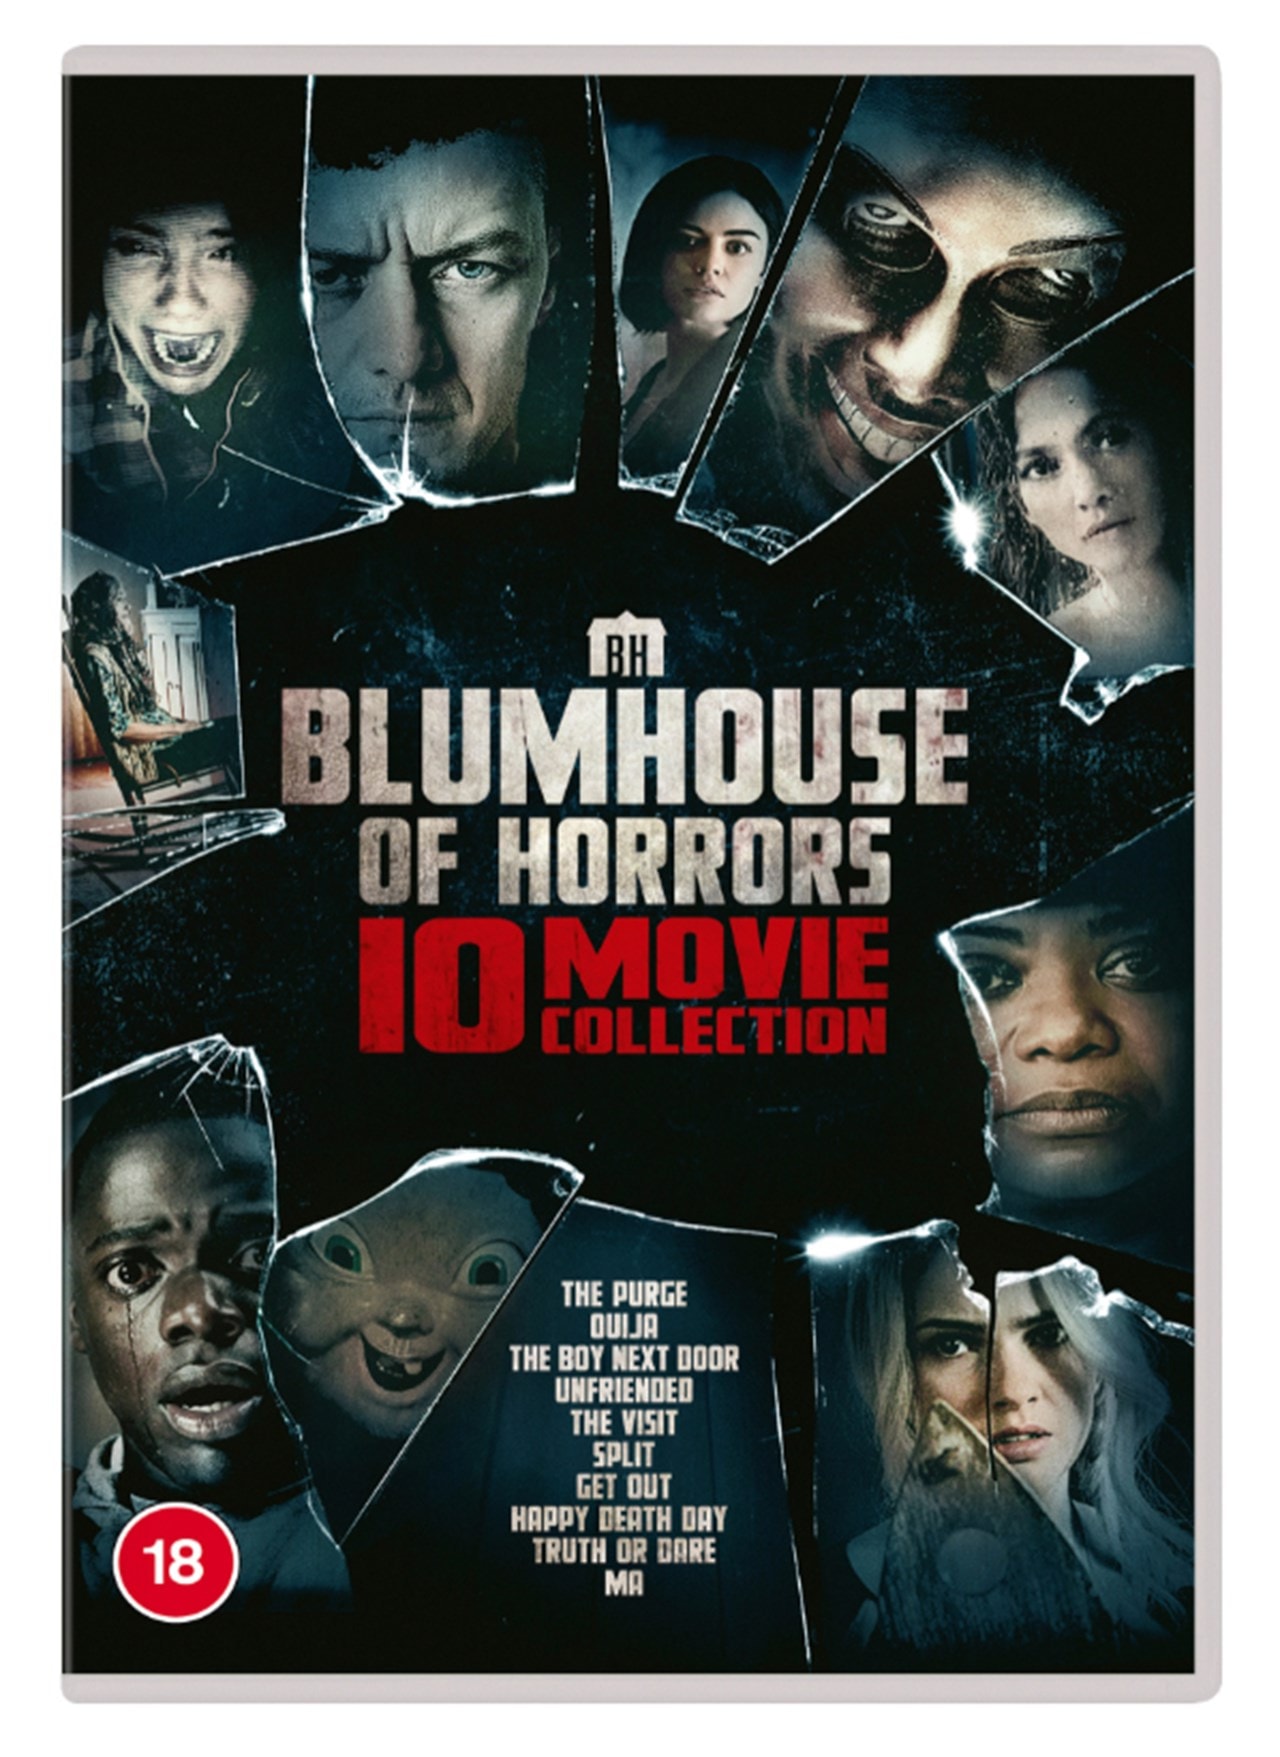 Blumhouse of Horrors 10movie Collection DVD Box Set Free shipping